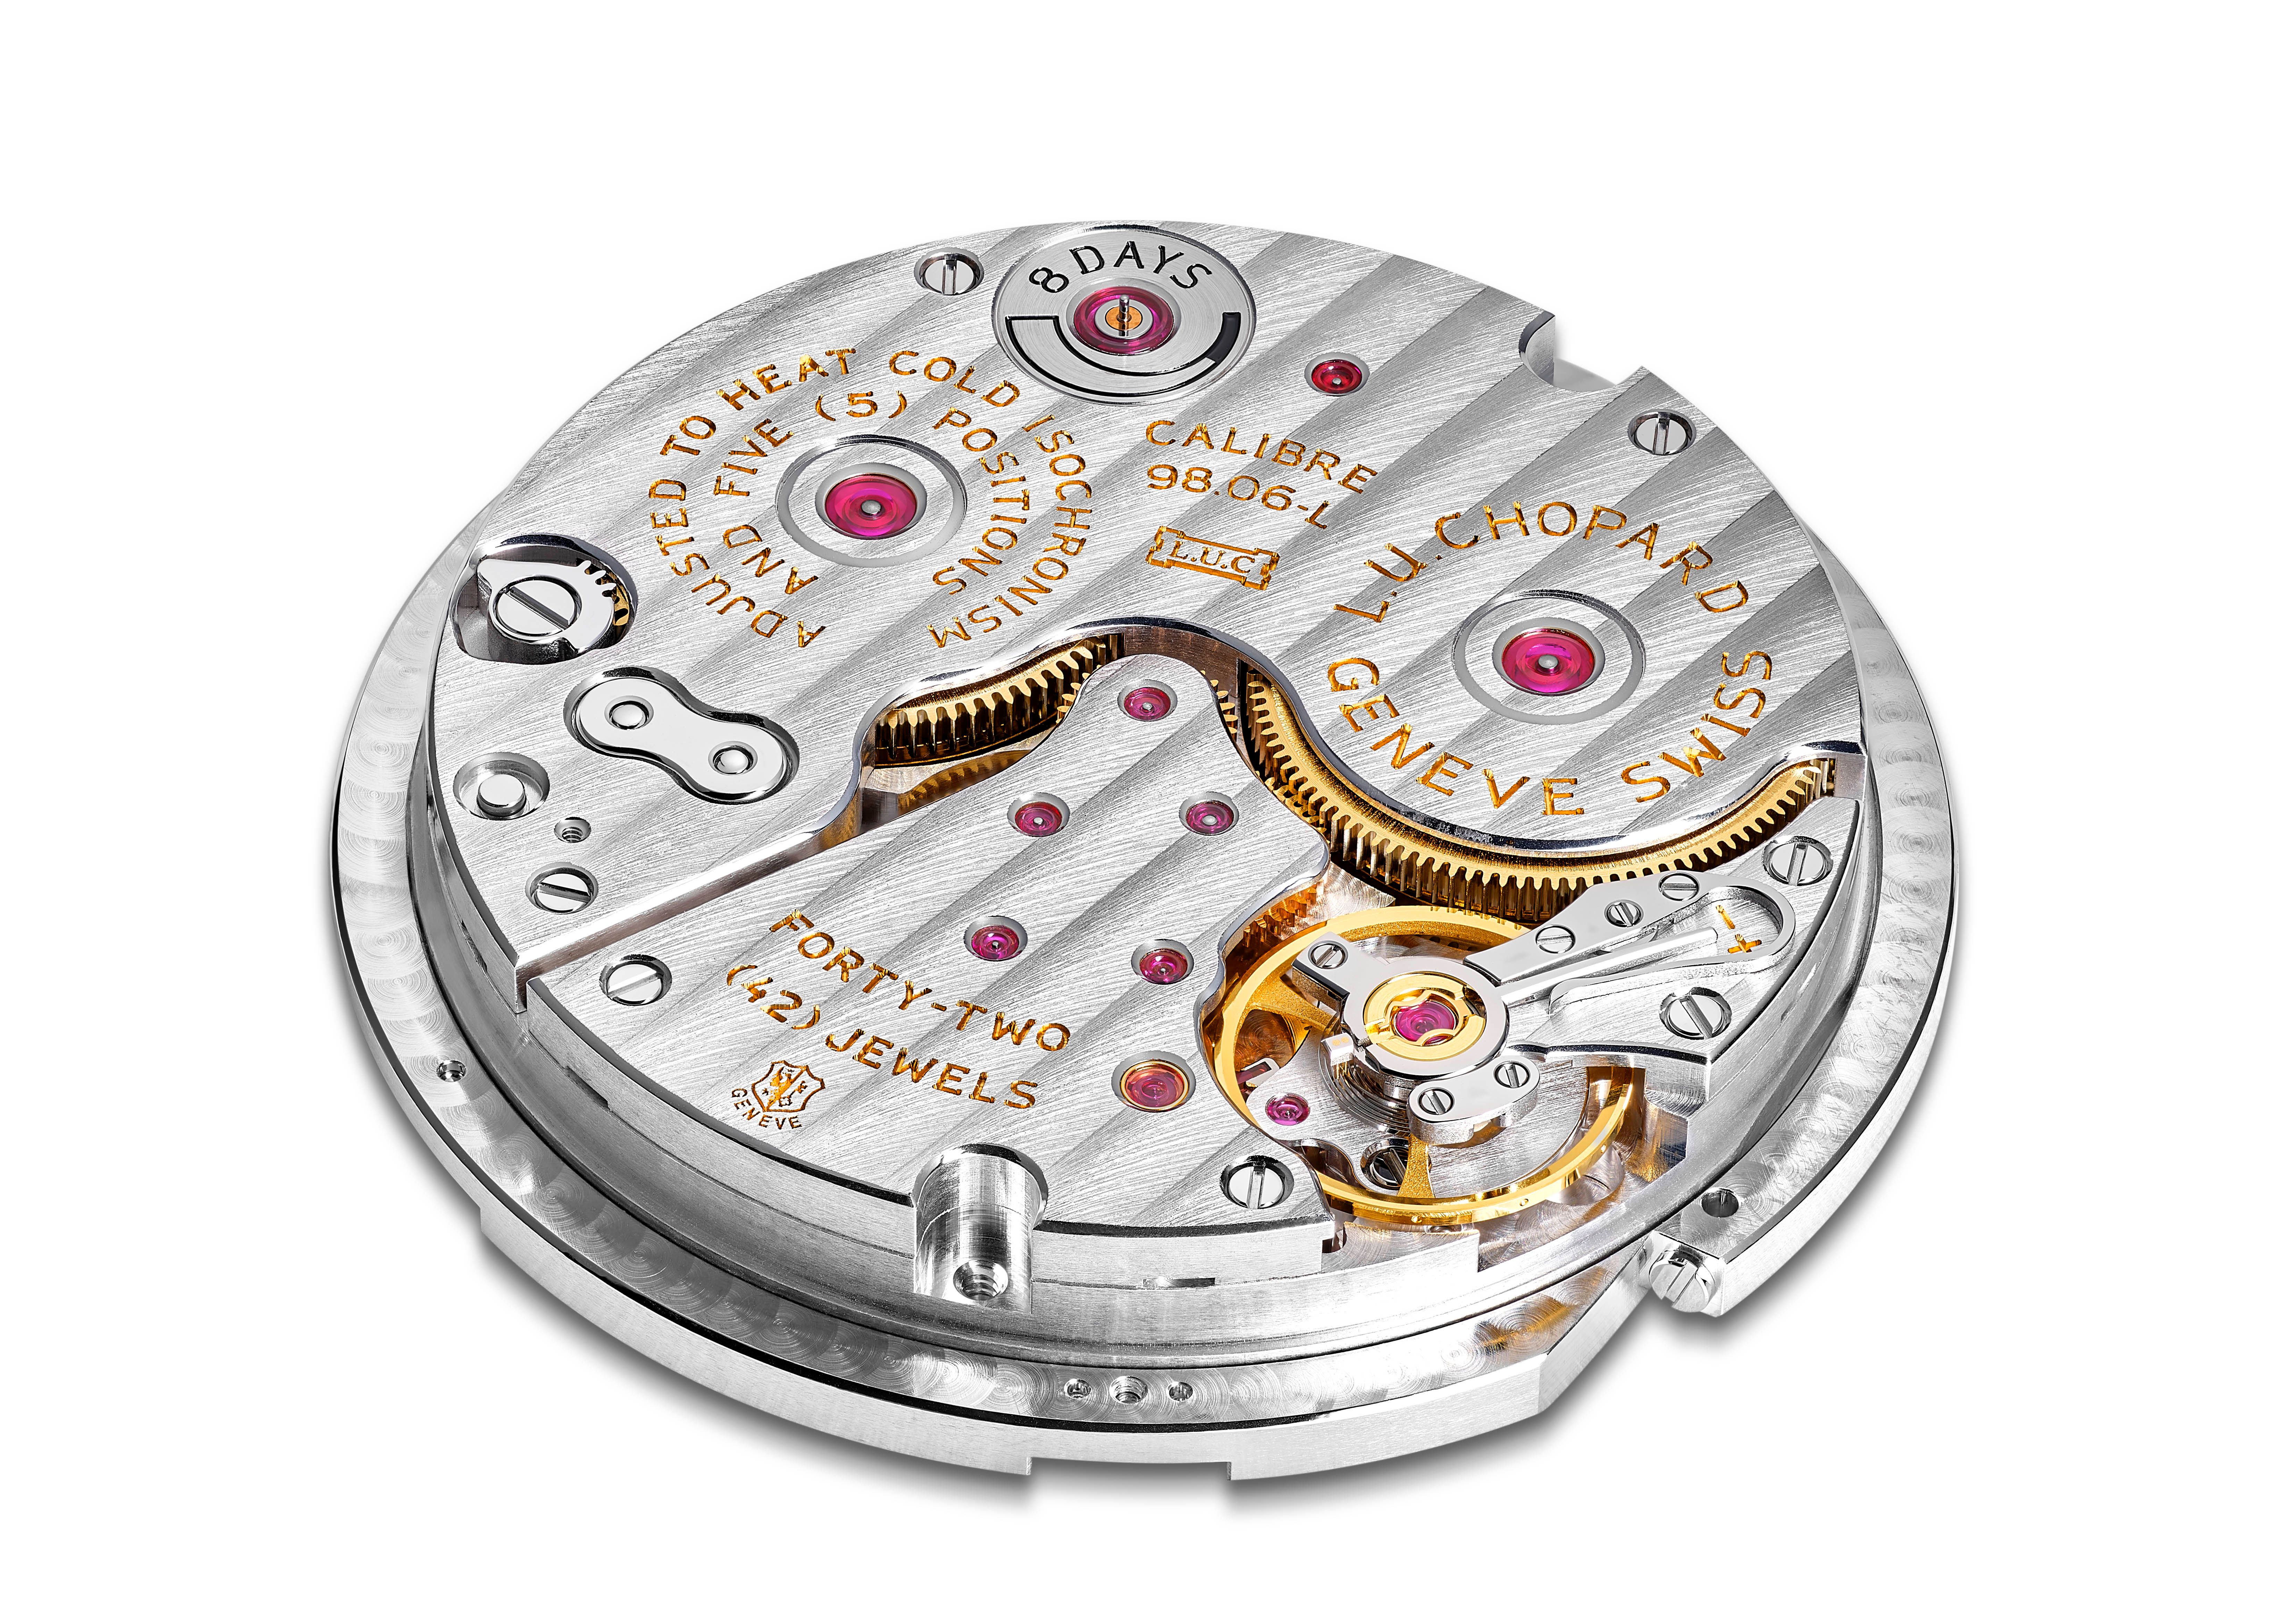 The L.U.C 98.06-L movement  features a jumping hours complication